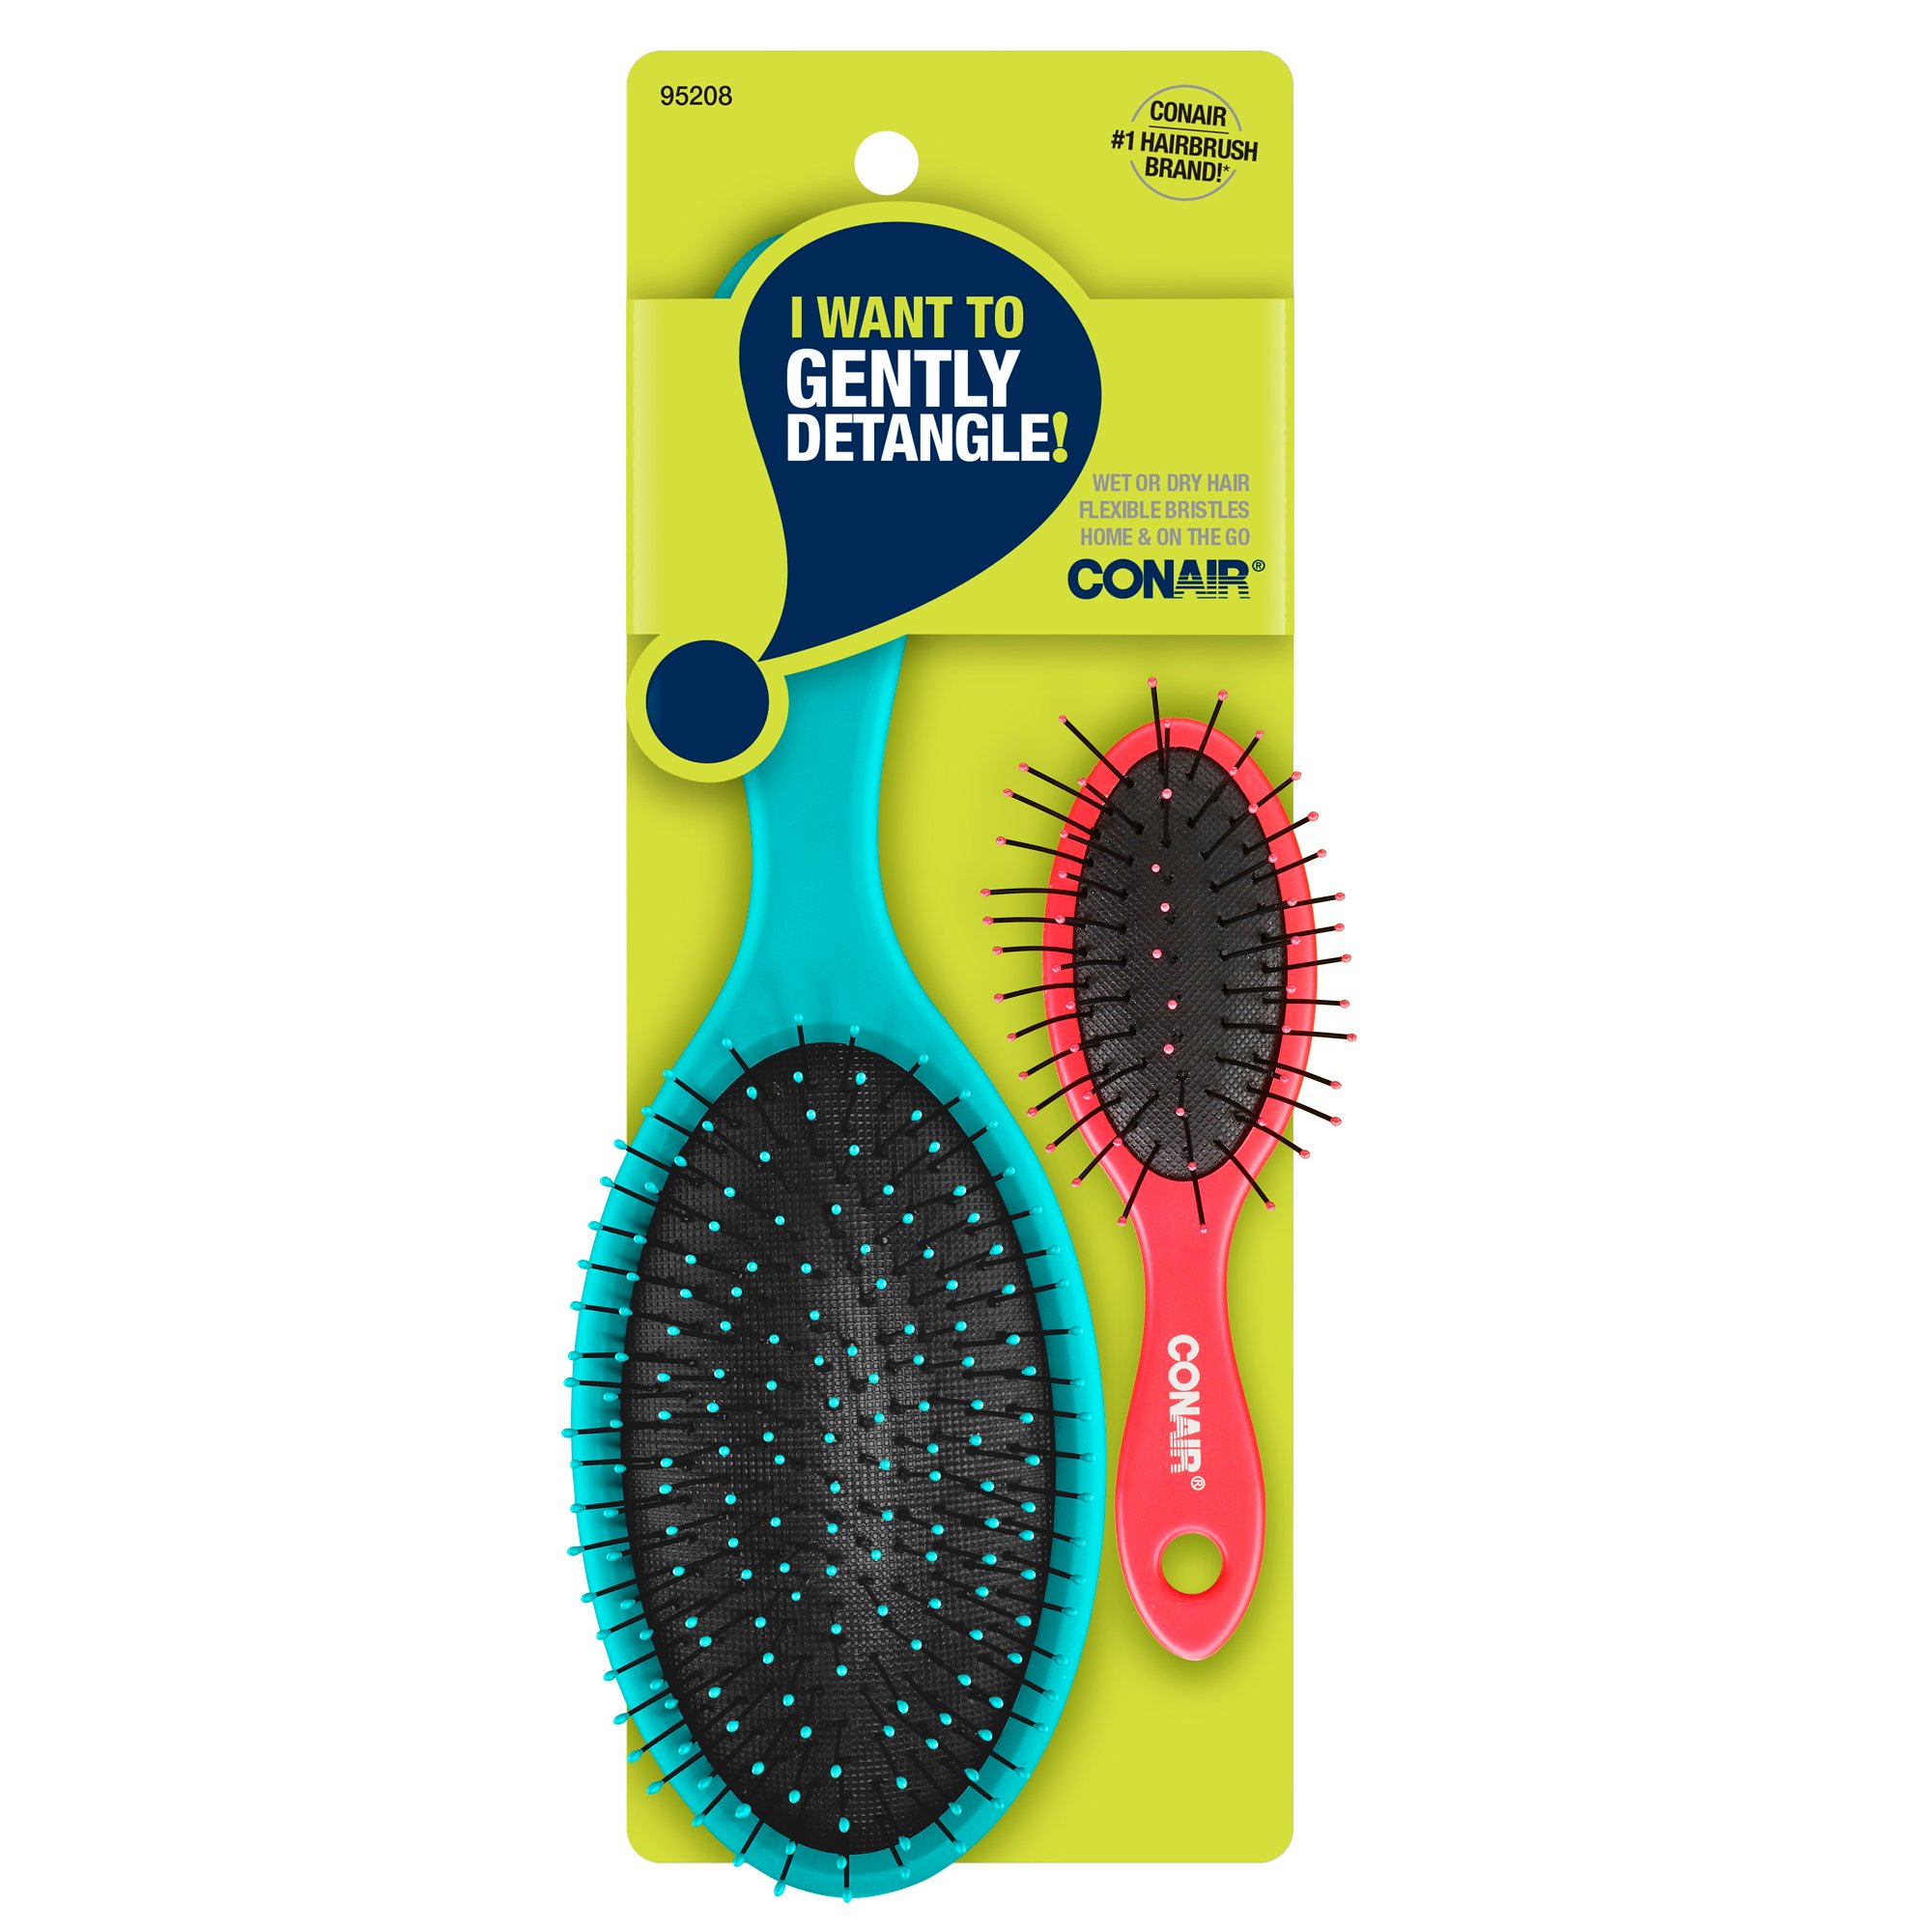 Diosa Brow Comb & Brush - 7 - Shop Brushes at H-E-B